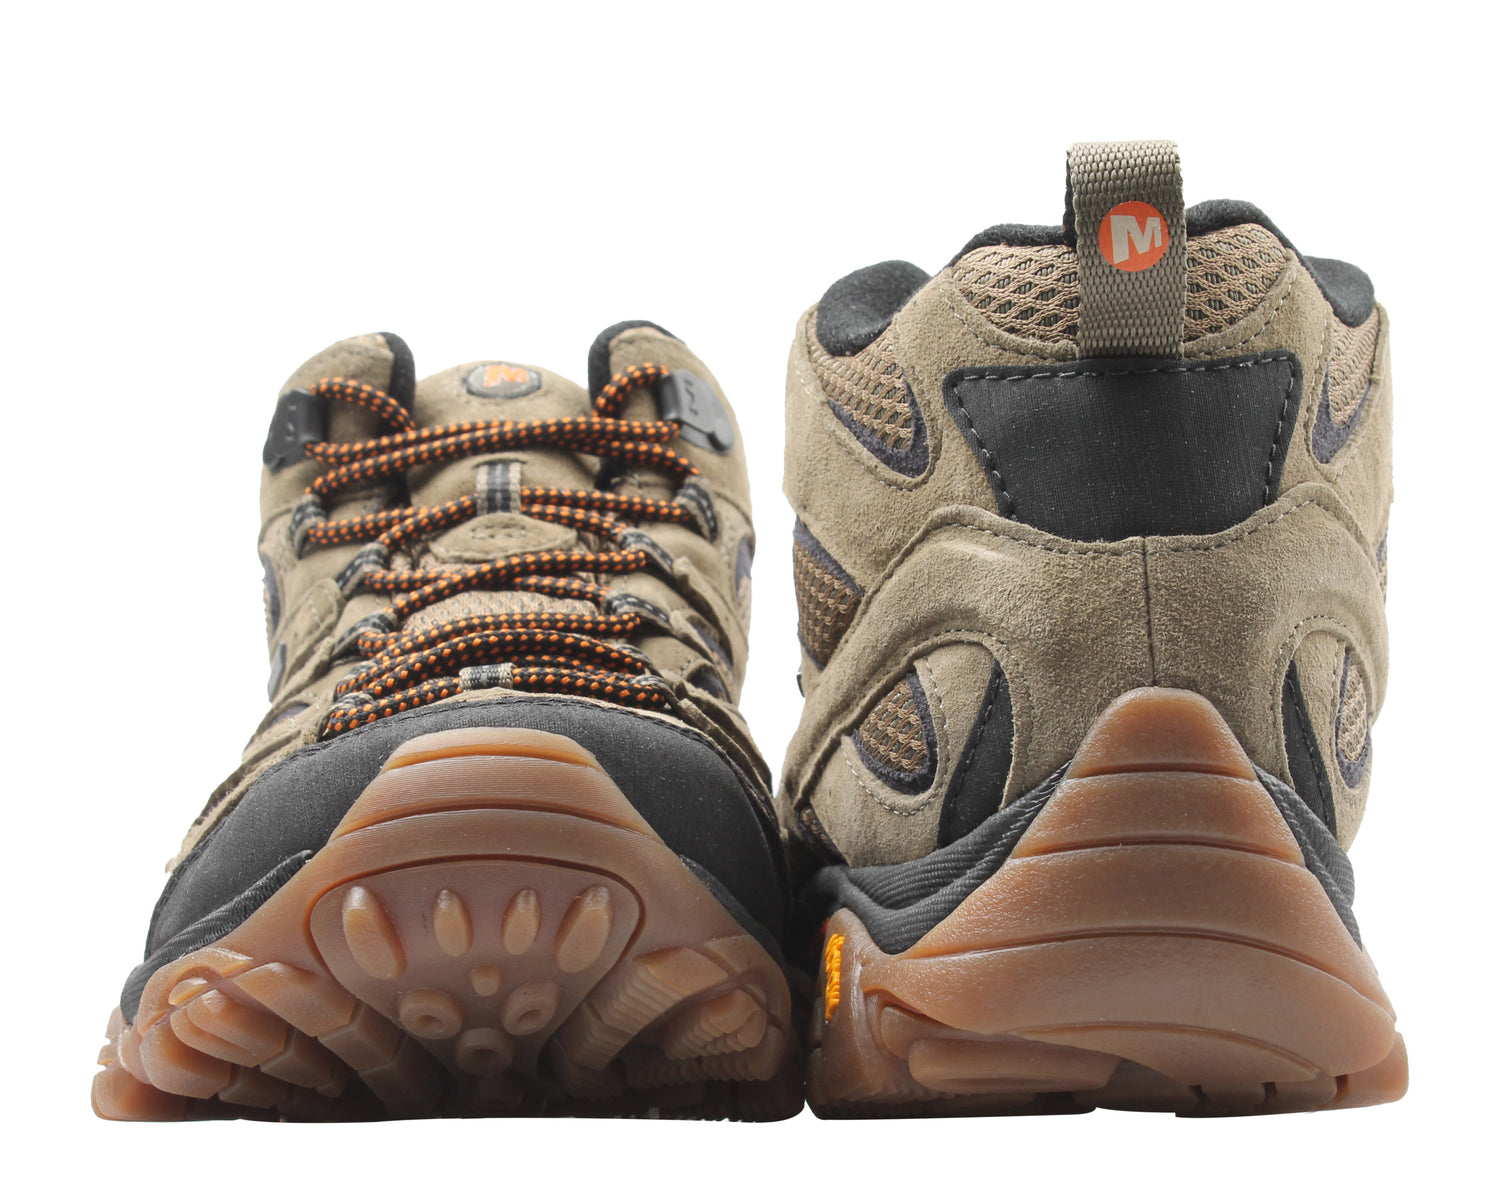 Merrell Moab 2 Leather Mid GORE-TEX Men's Hiking Boots